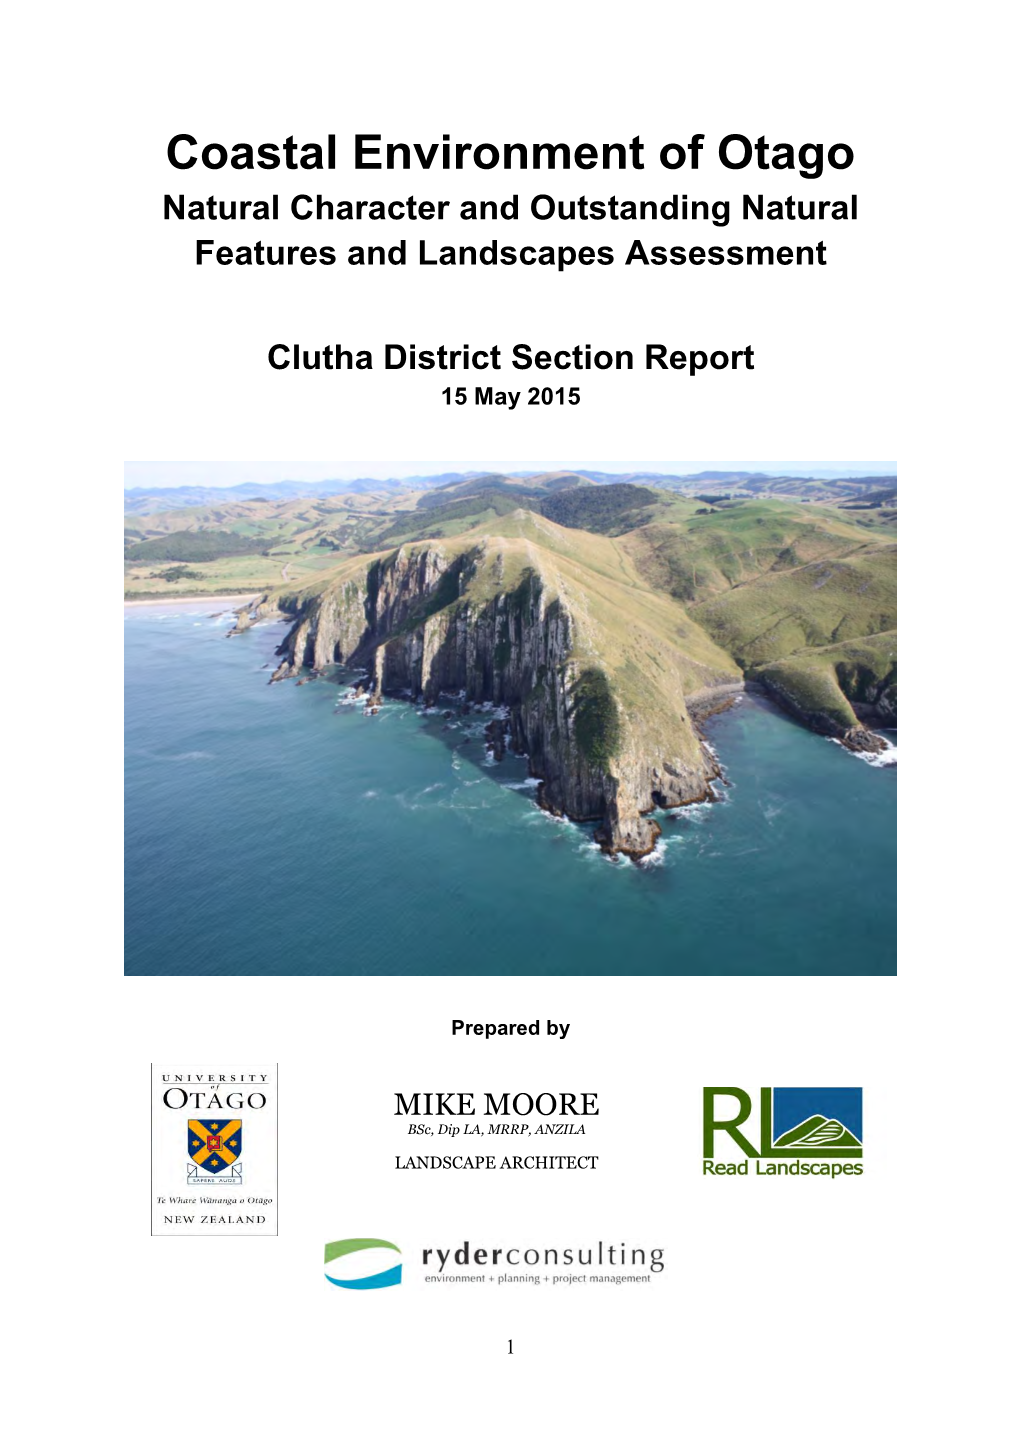 Coastal Environment of Otago Natural Character and Outstanding Natural Features and Landscapes Assessment